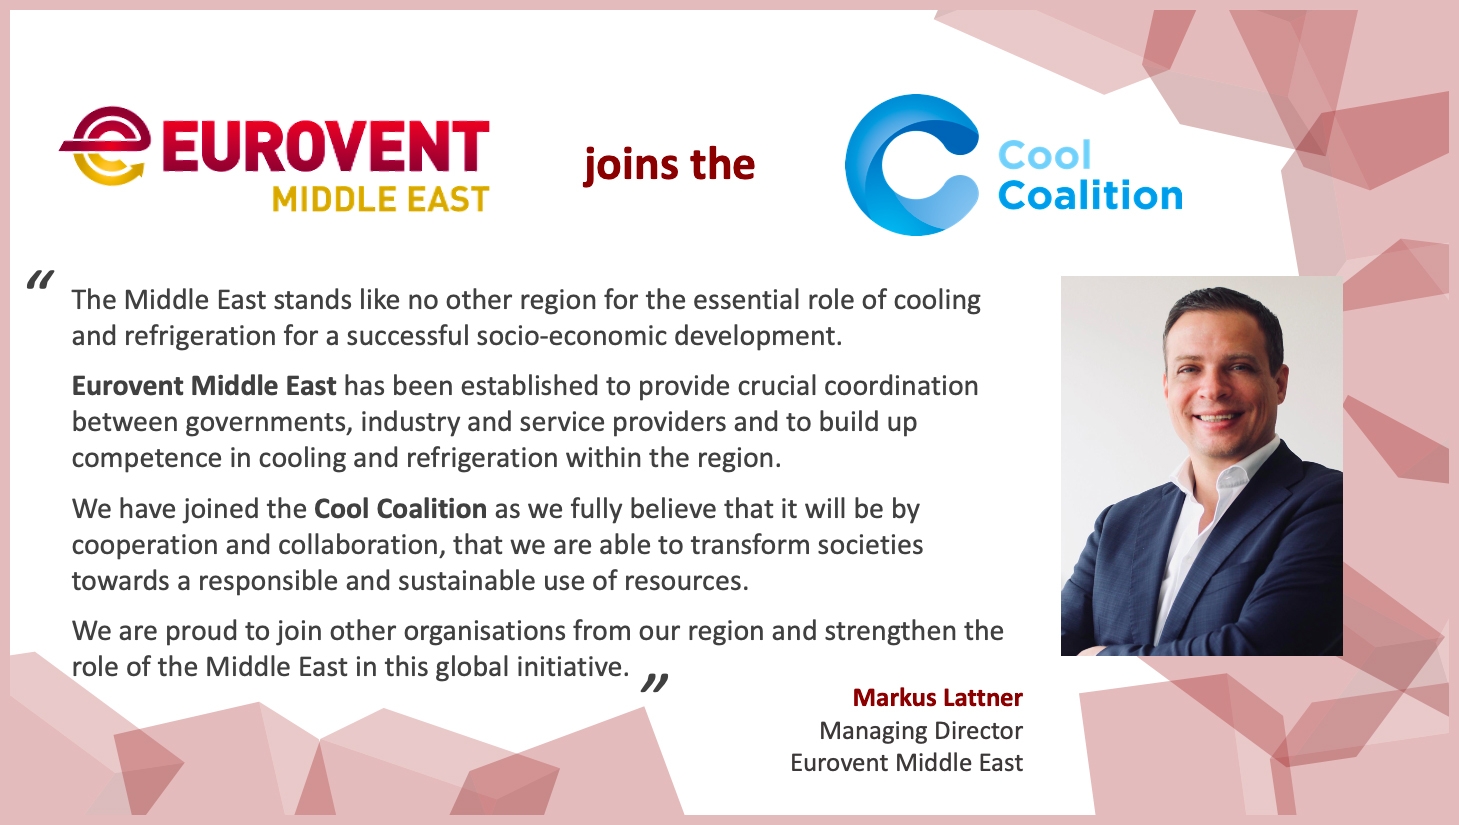 2021 - Eurovent Middle East joins UN Cool Coalition